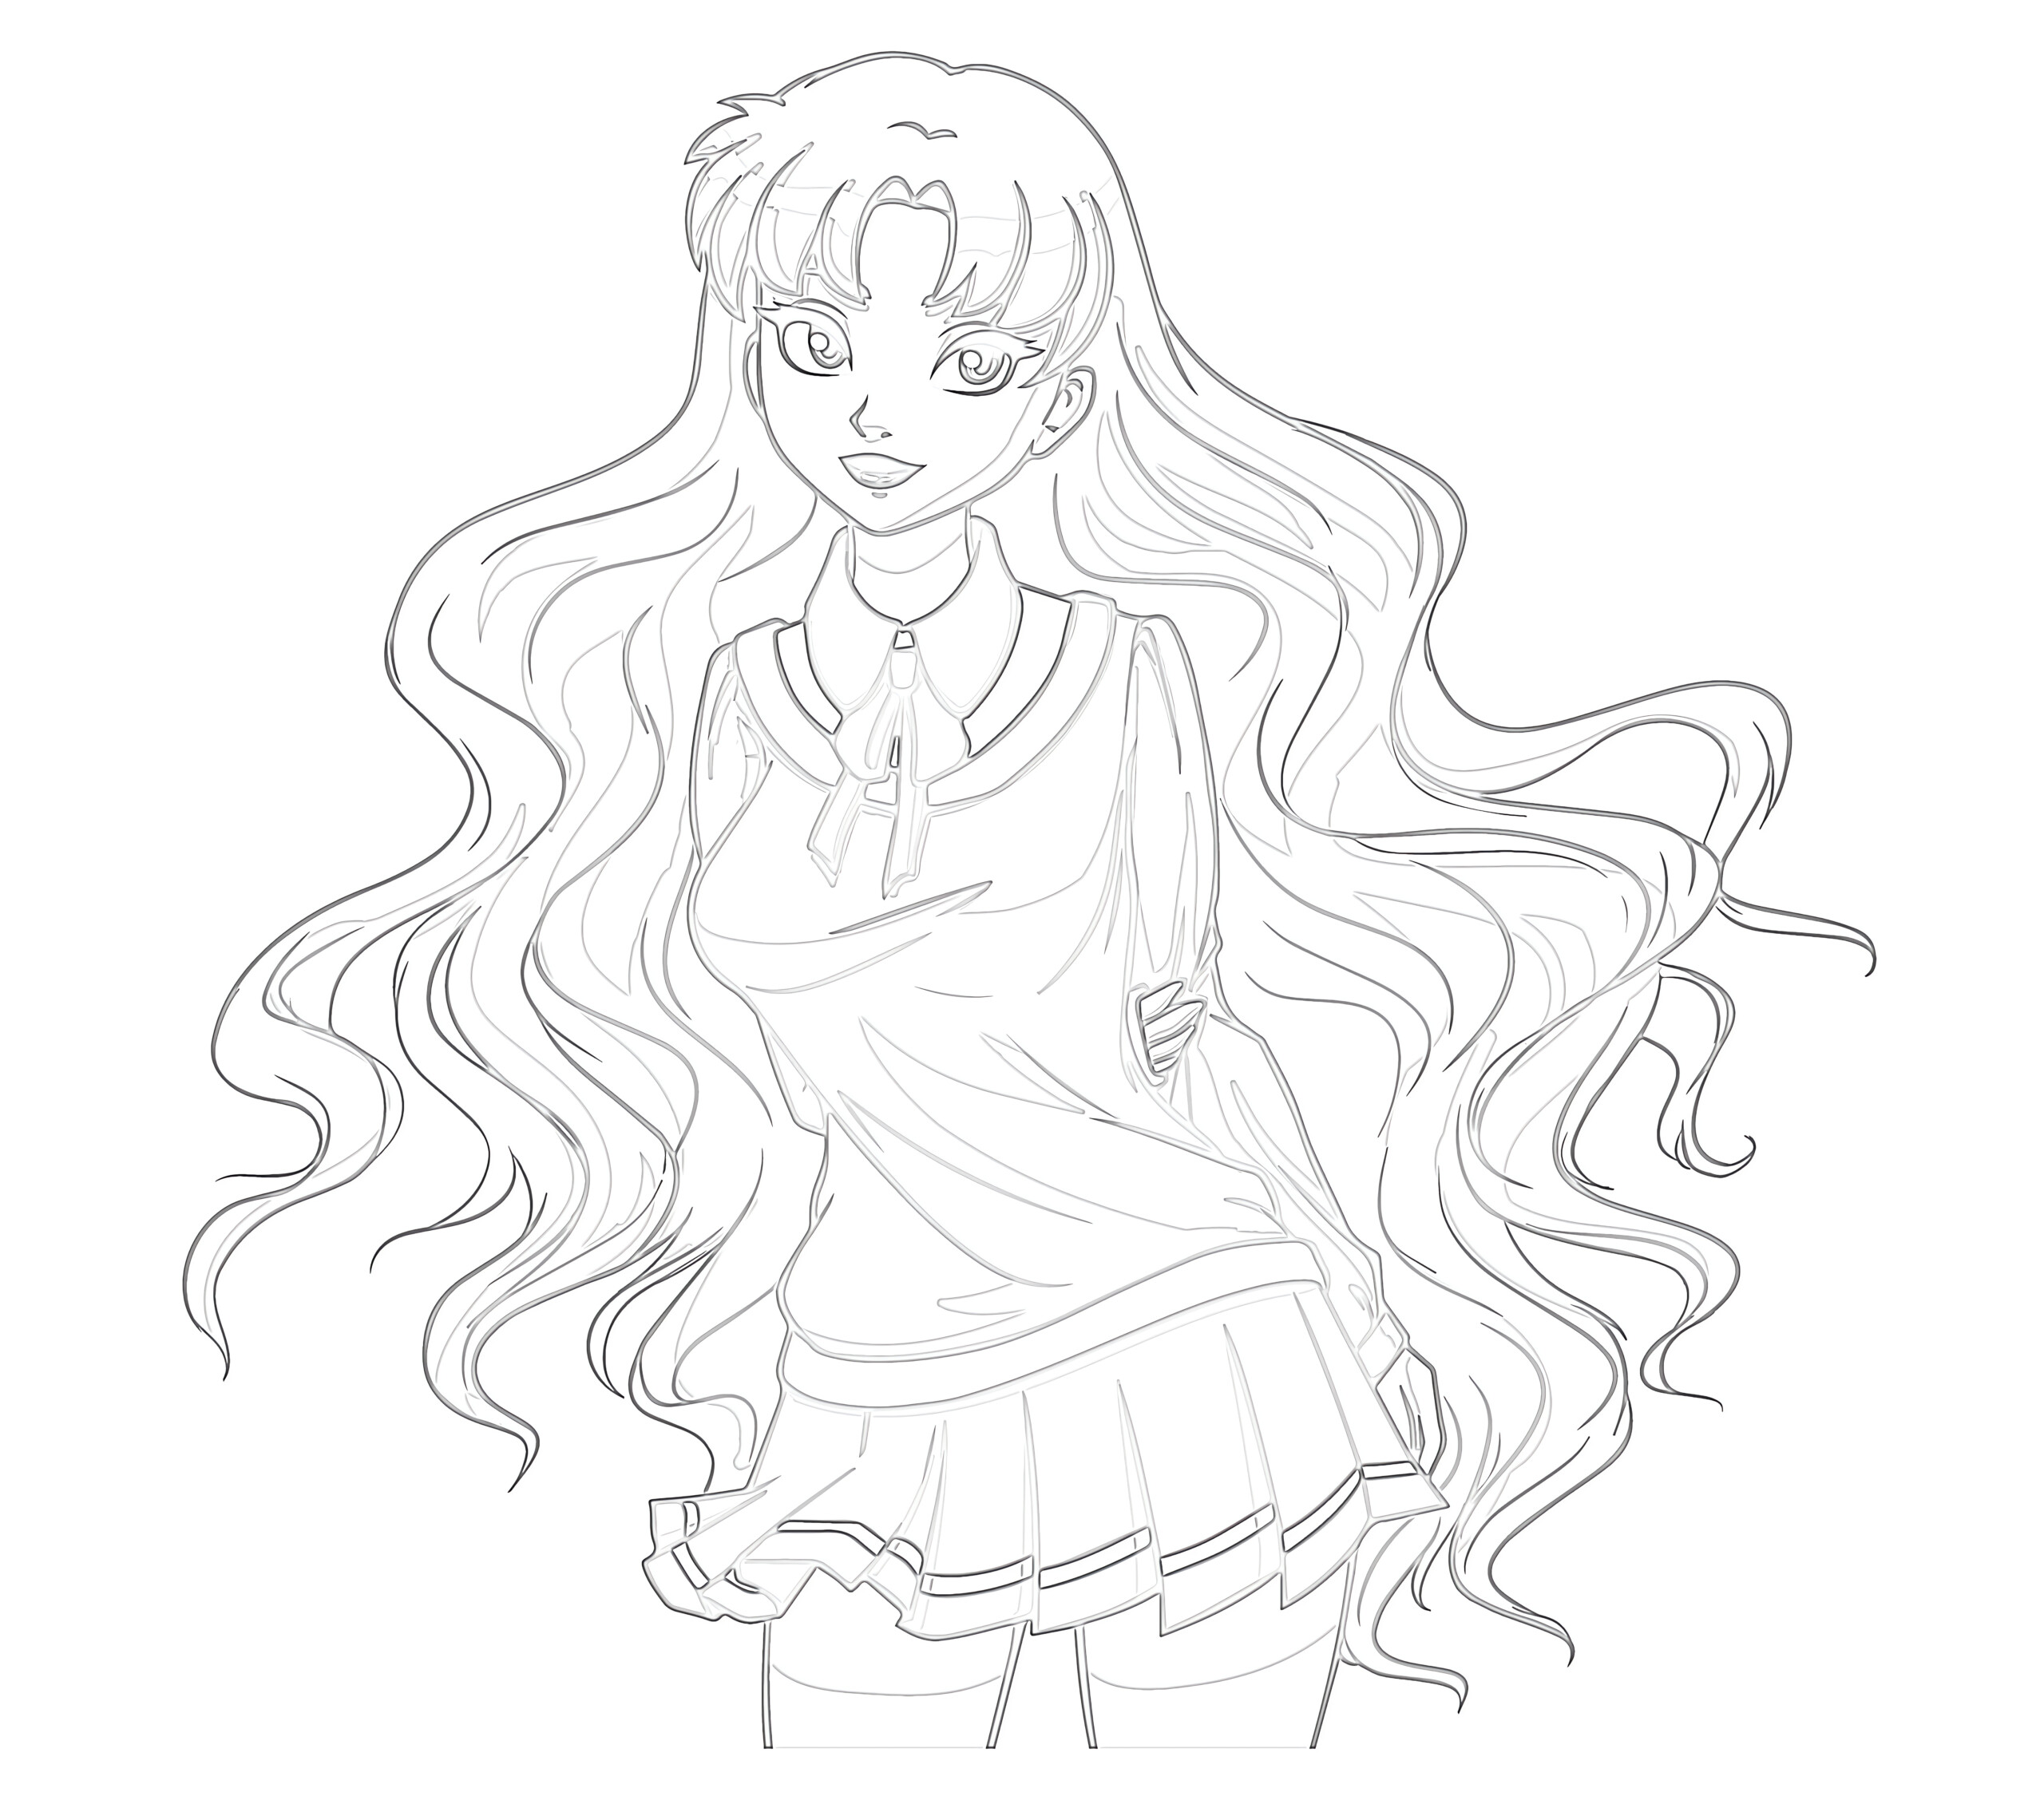 Girl Anime - Coloring page